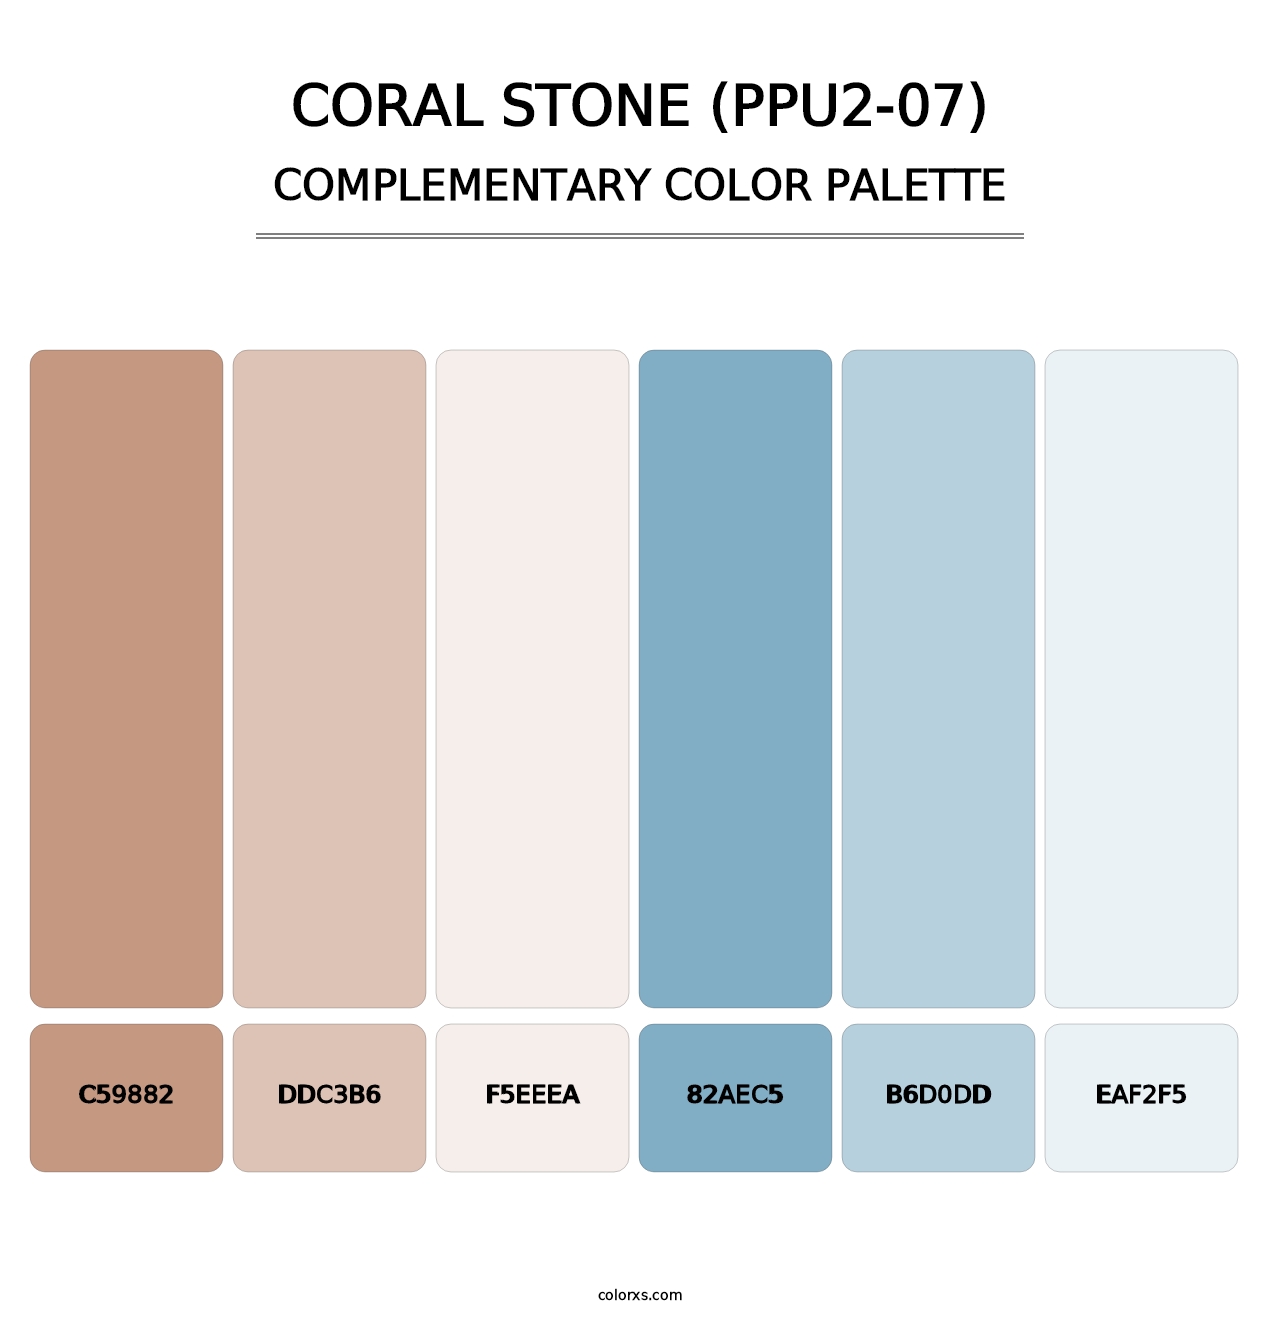 Coral Stone (PPU2-07) - Complementary Color Palette